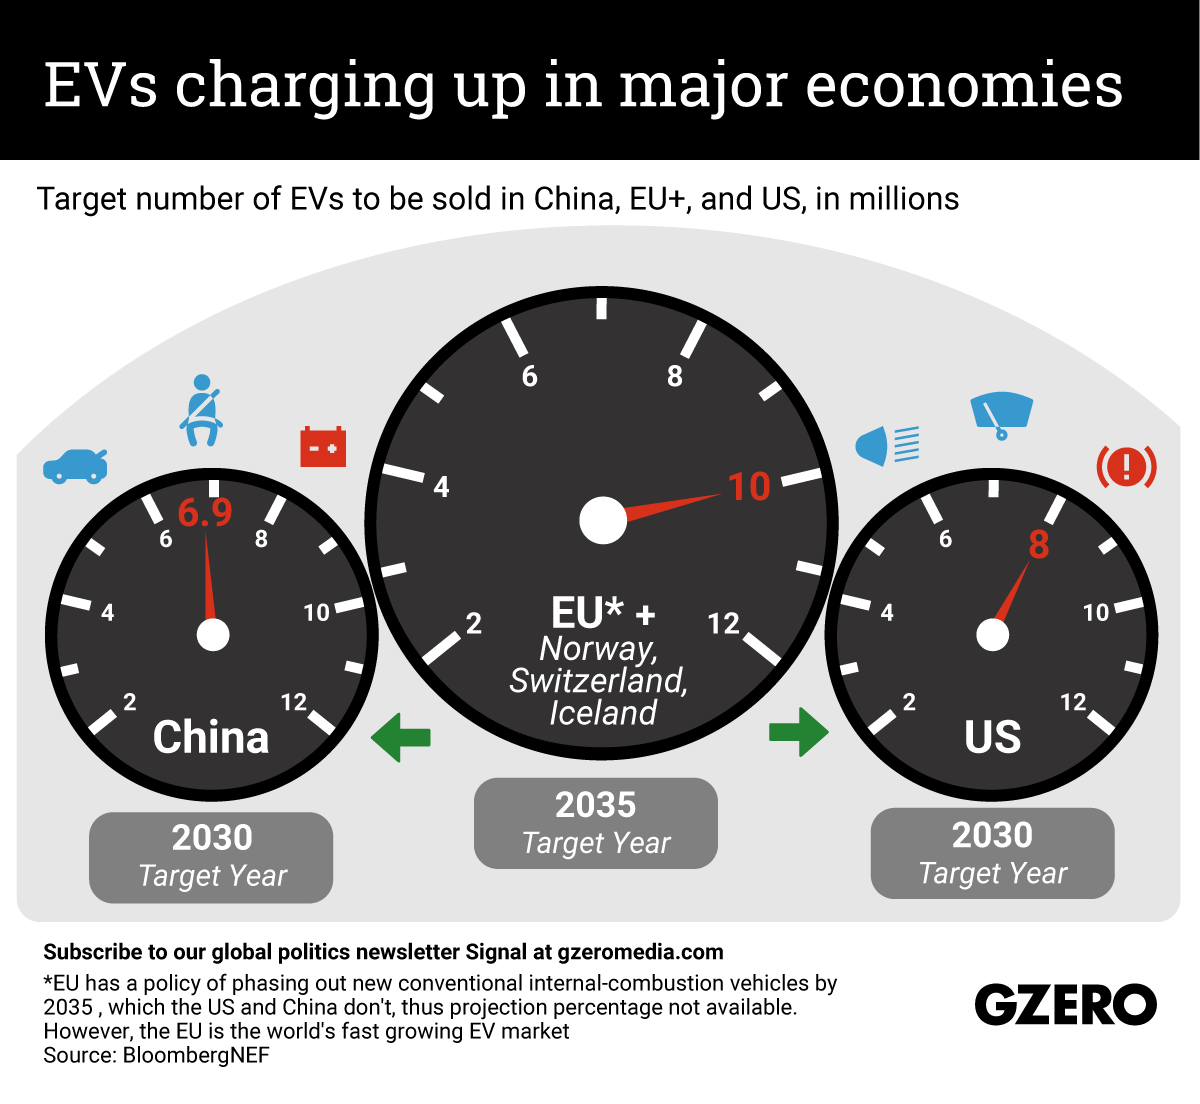 The Graphic Truth: EVs charging up in major economies